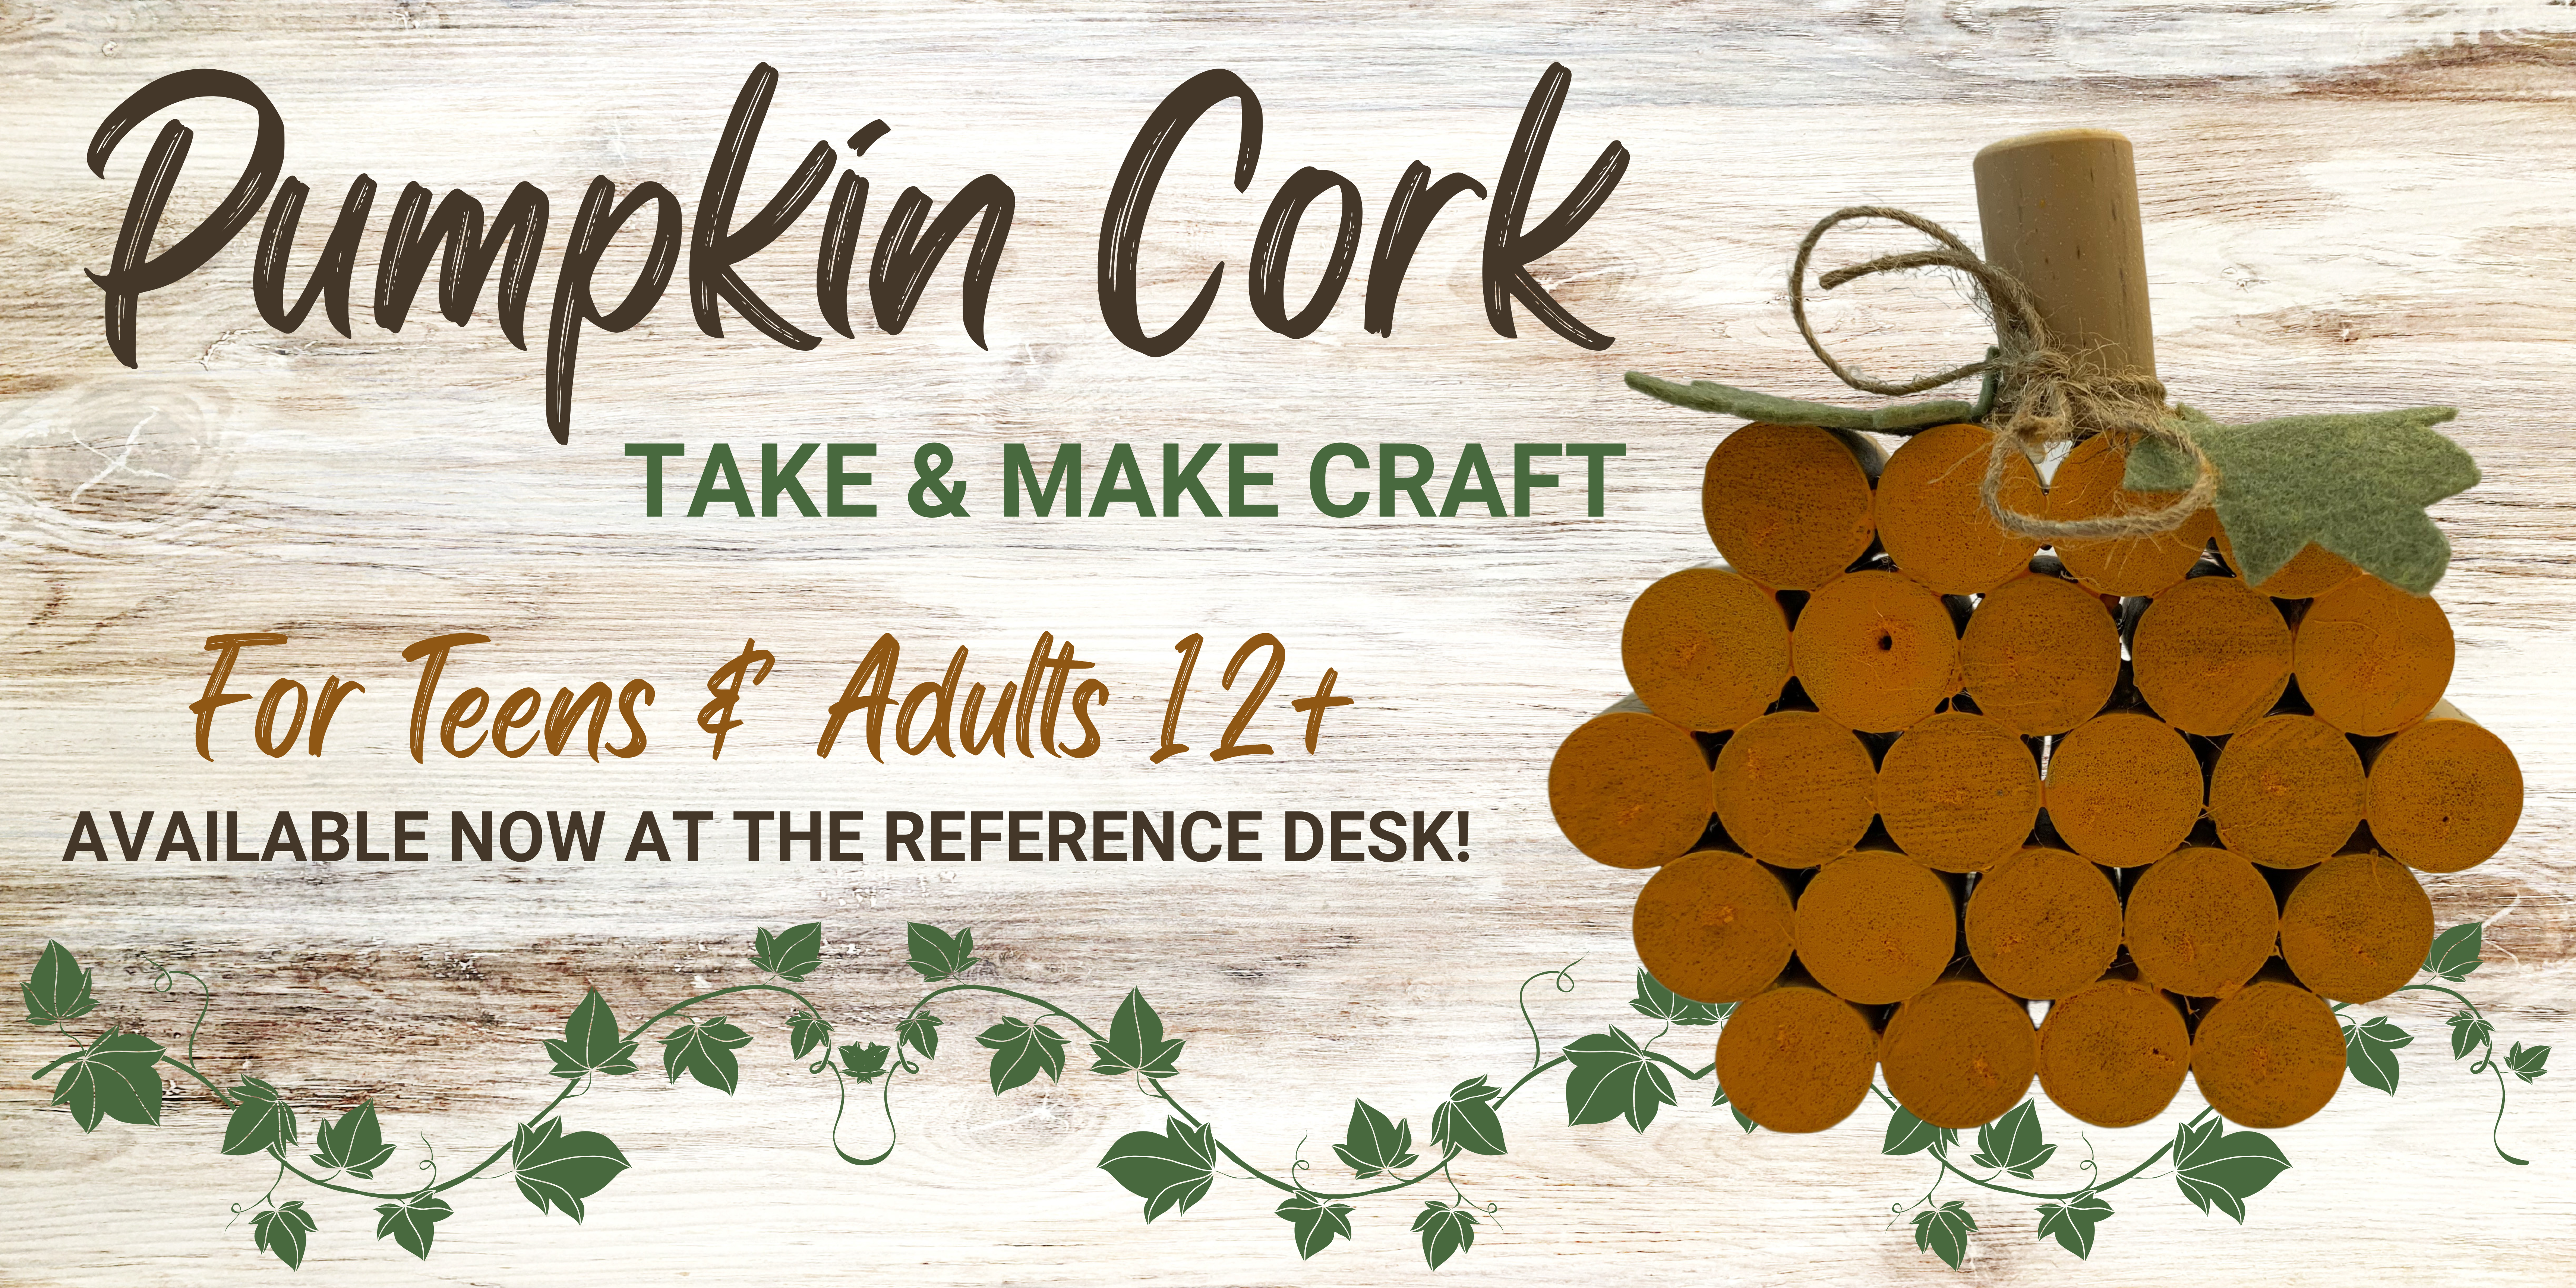 Take & Make Craft Pumpkin Cork Available now at the Reference Desk! For Teens & Adults 12+